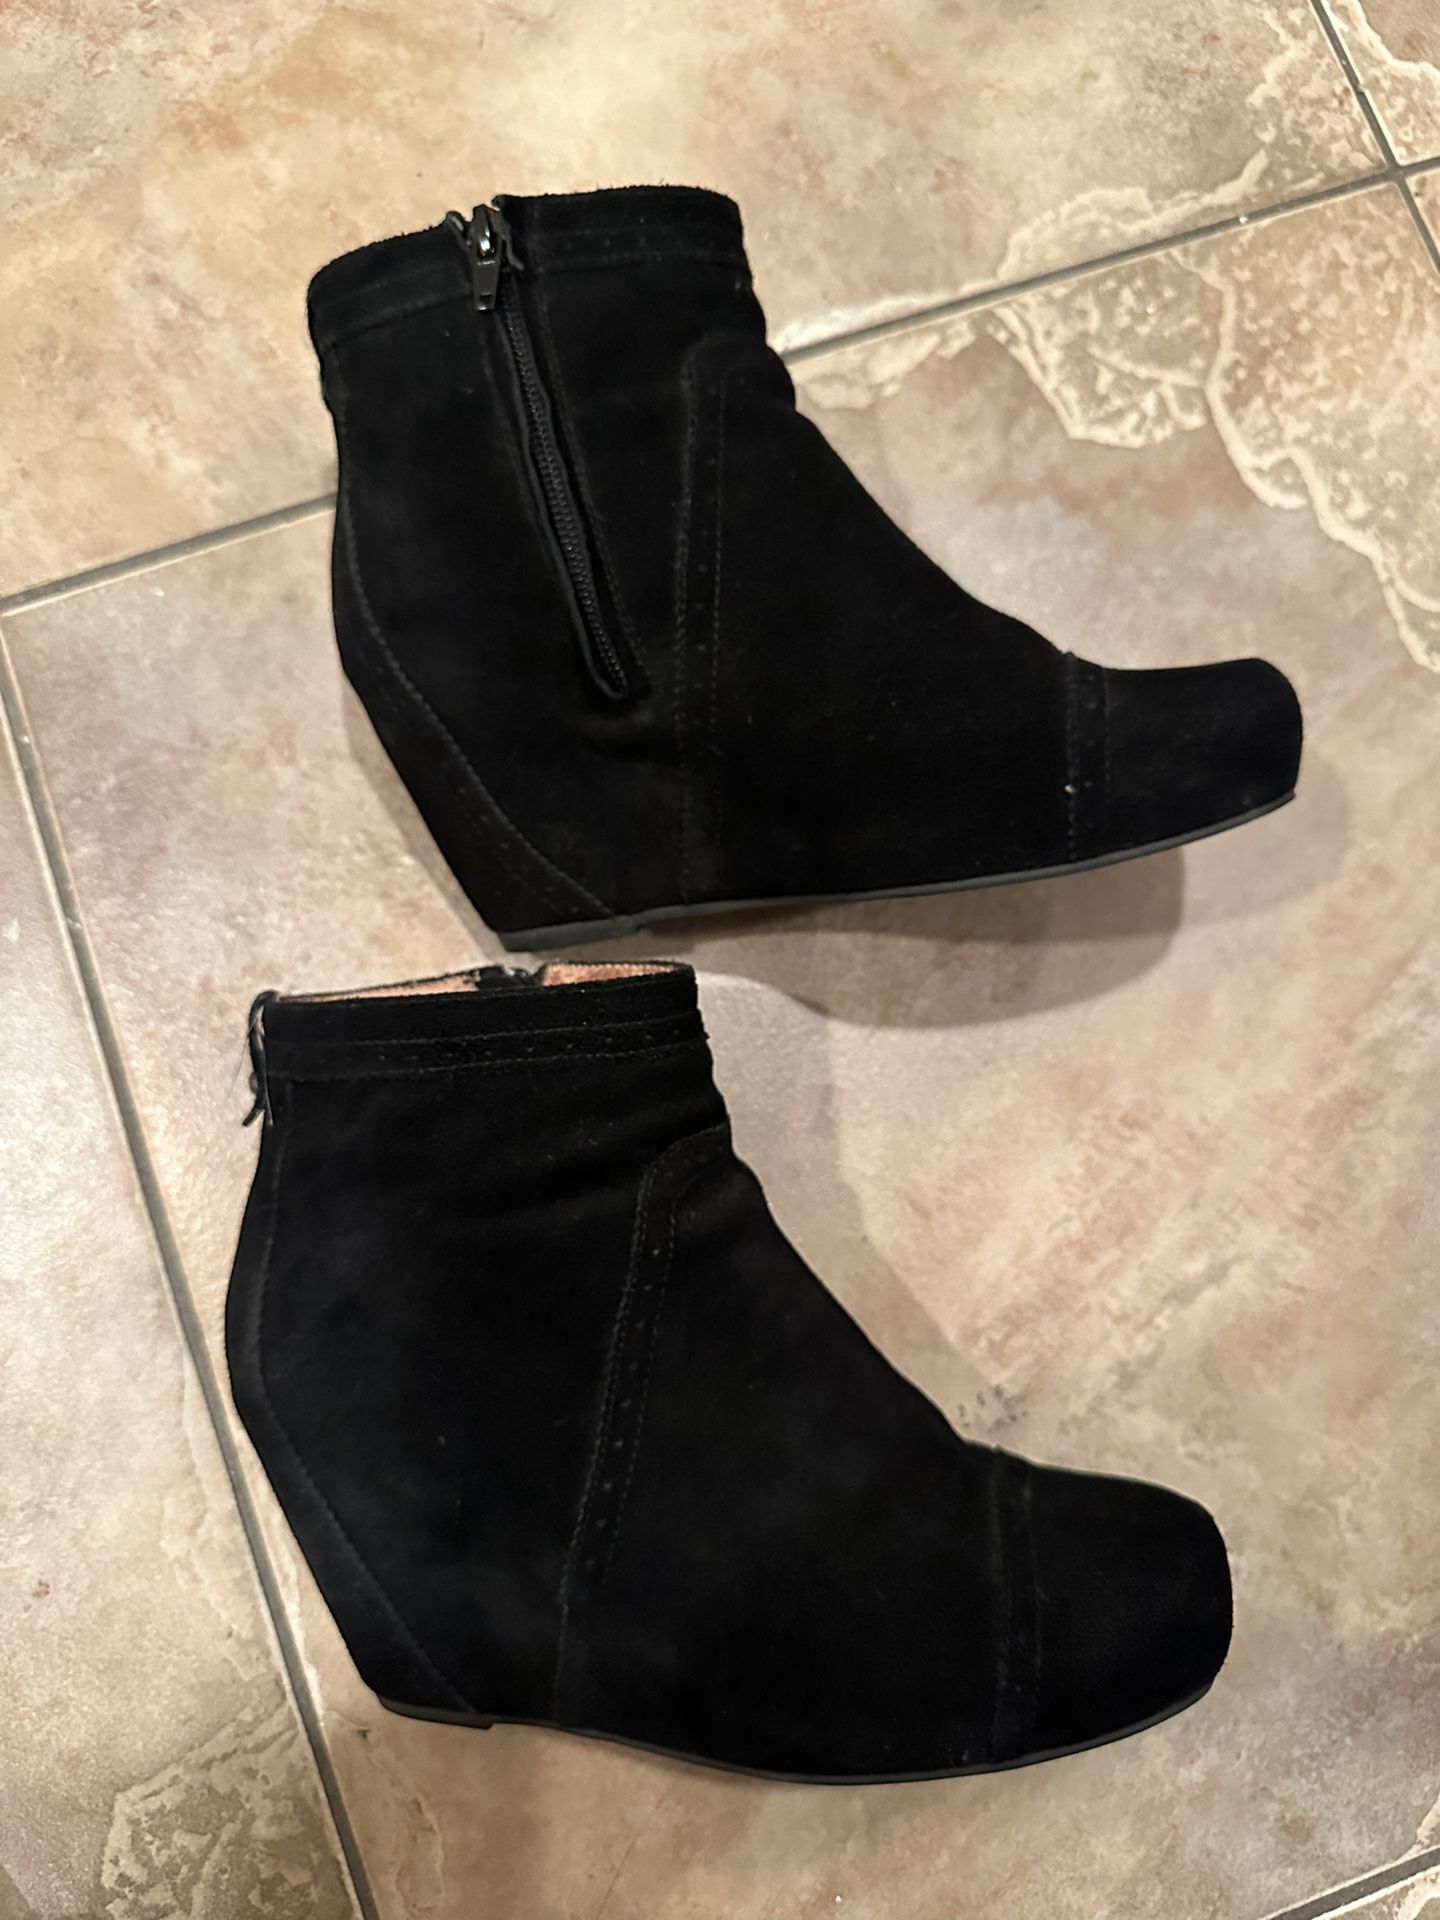 Jeffrey Campbell Black Suede Booties Size 7